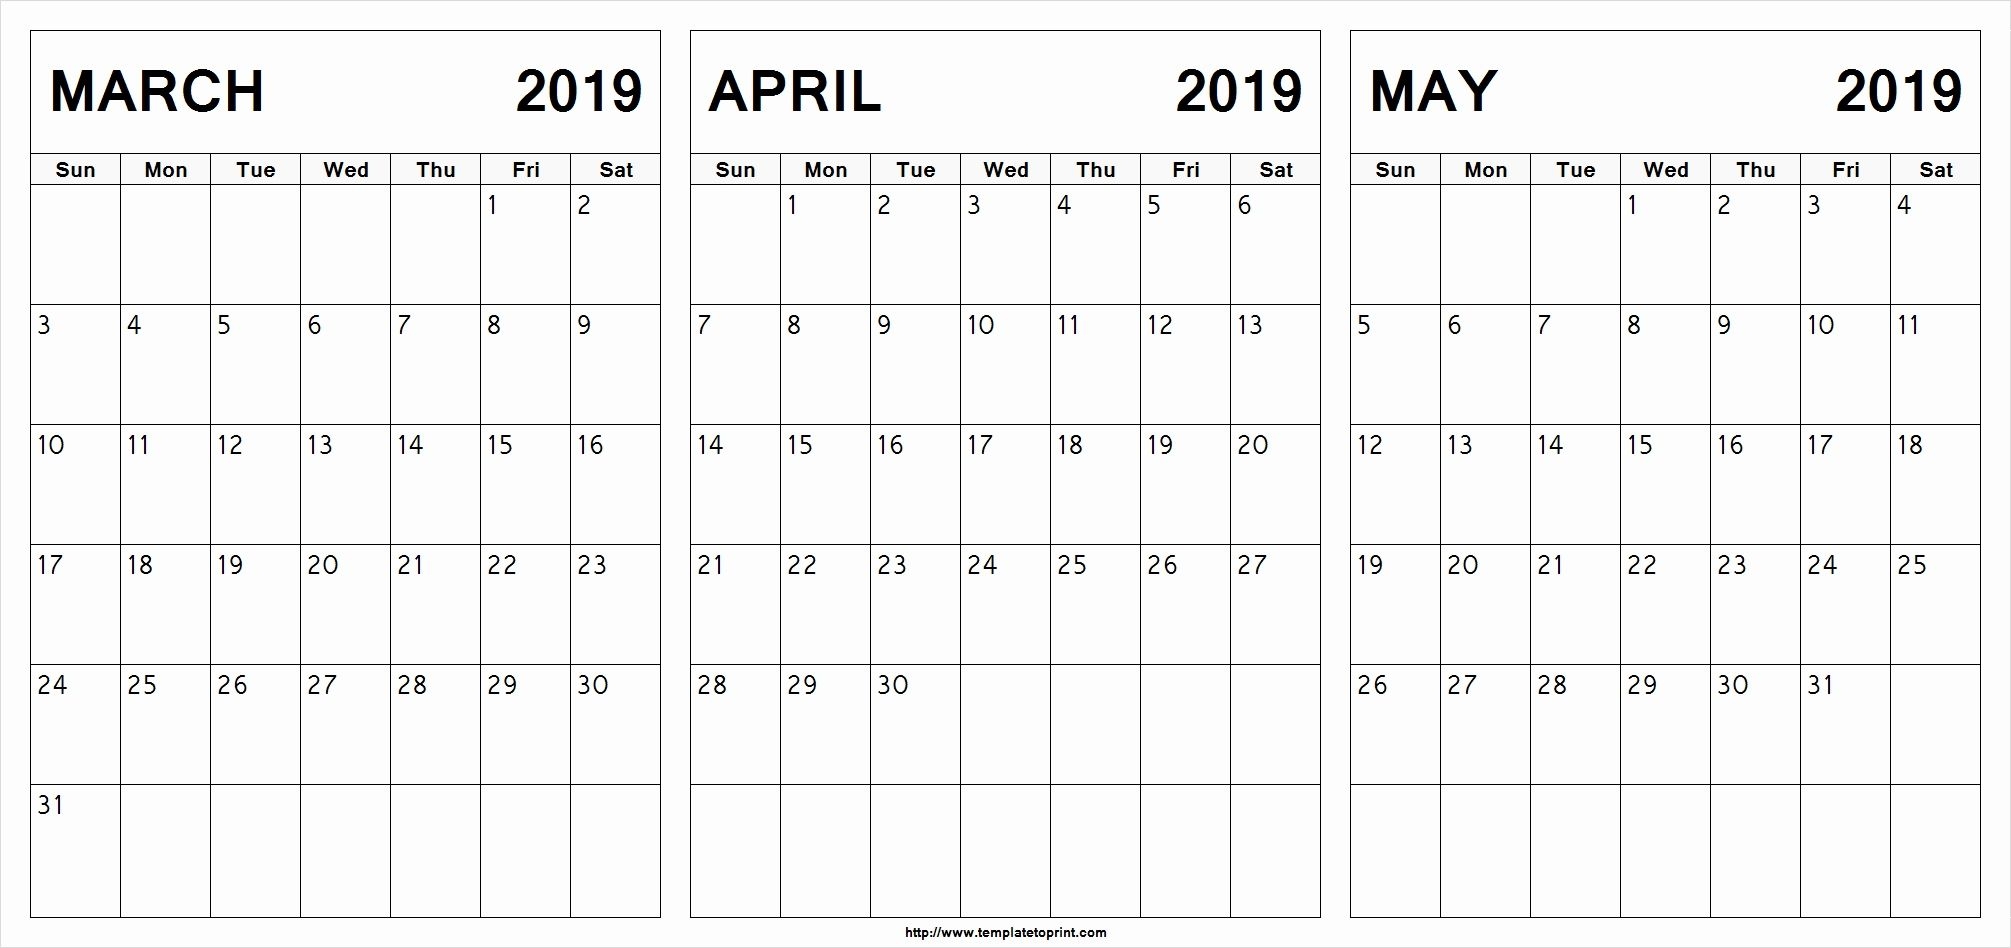 march-april-and-may-2019-calendar-qualads